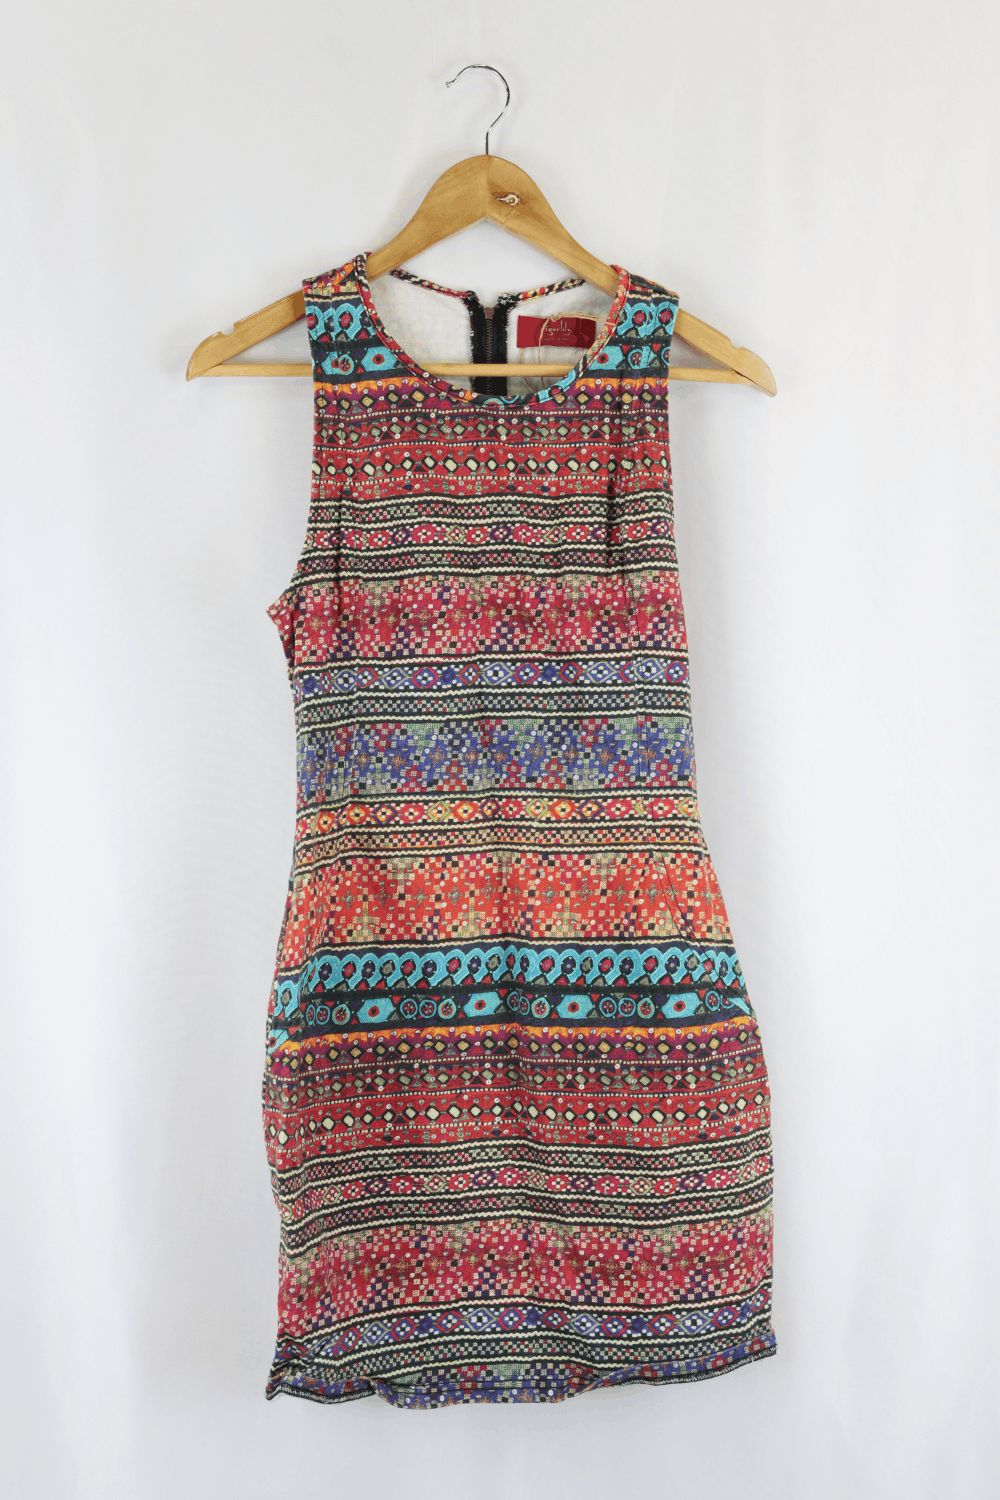 Tigerlilly Multicolored Dress10